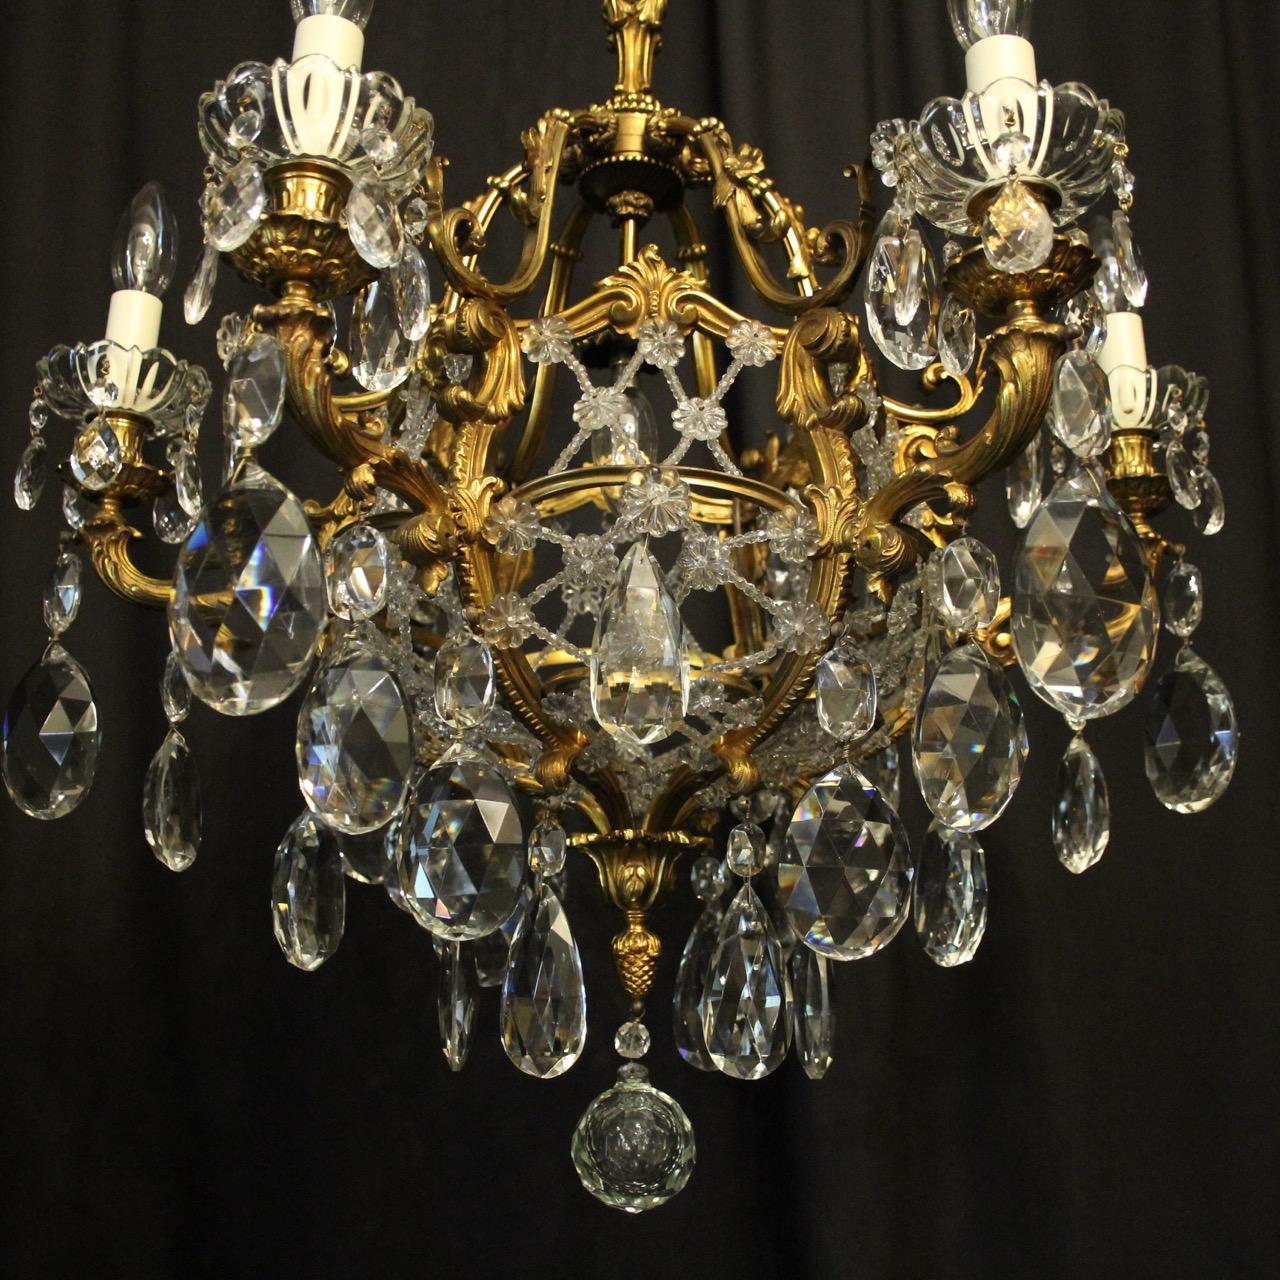 A French gilded bronze and crystal 7-light birdcage form antique chandelier, the 6 leaf scrolling arms with glass bobeche drip pans and bulbous candle sconces, issuing from a cage form interior decorated with a single inverted light fitting and